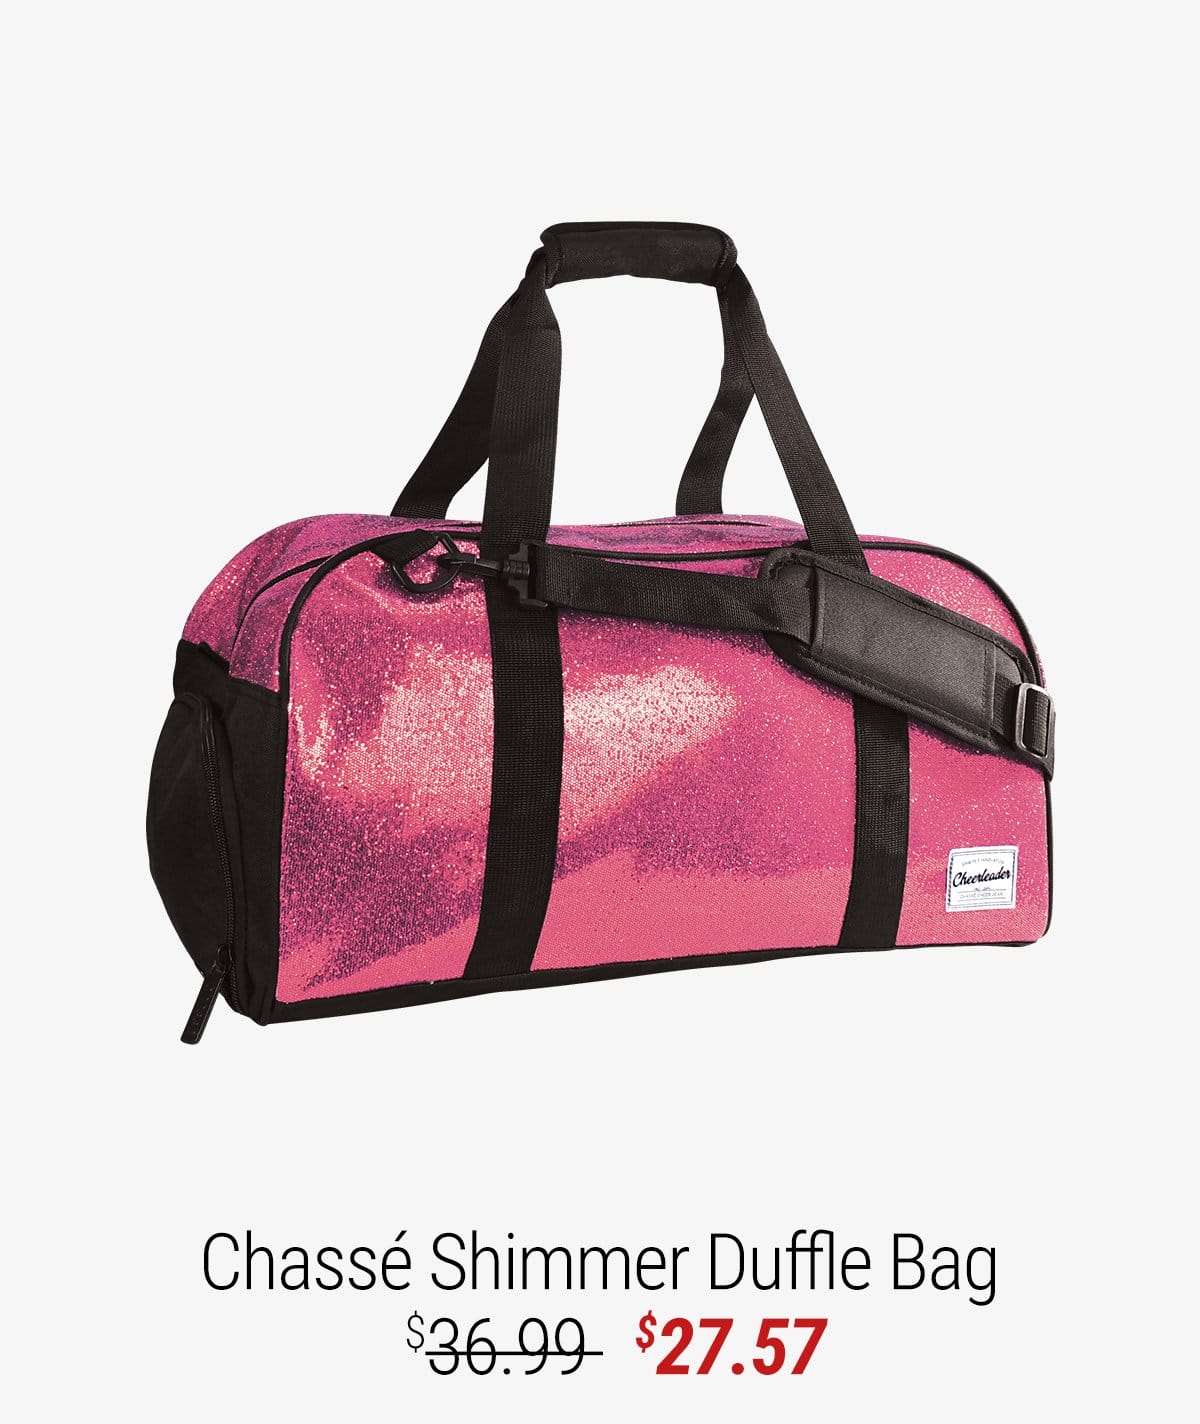 CHASSE SHIMMER DUFFLE BAG